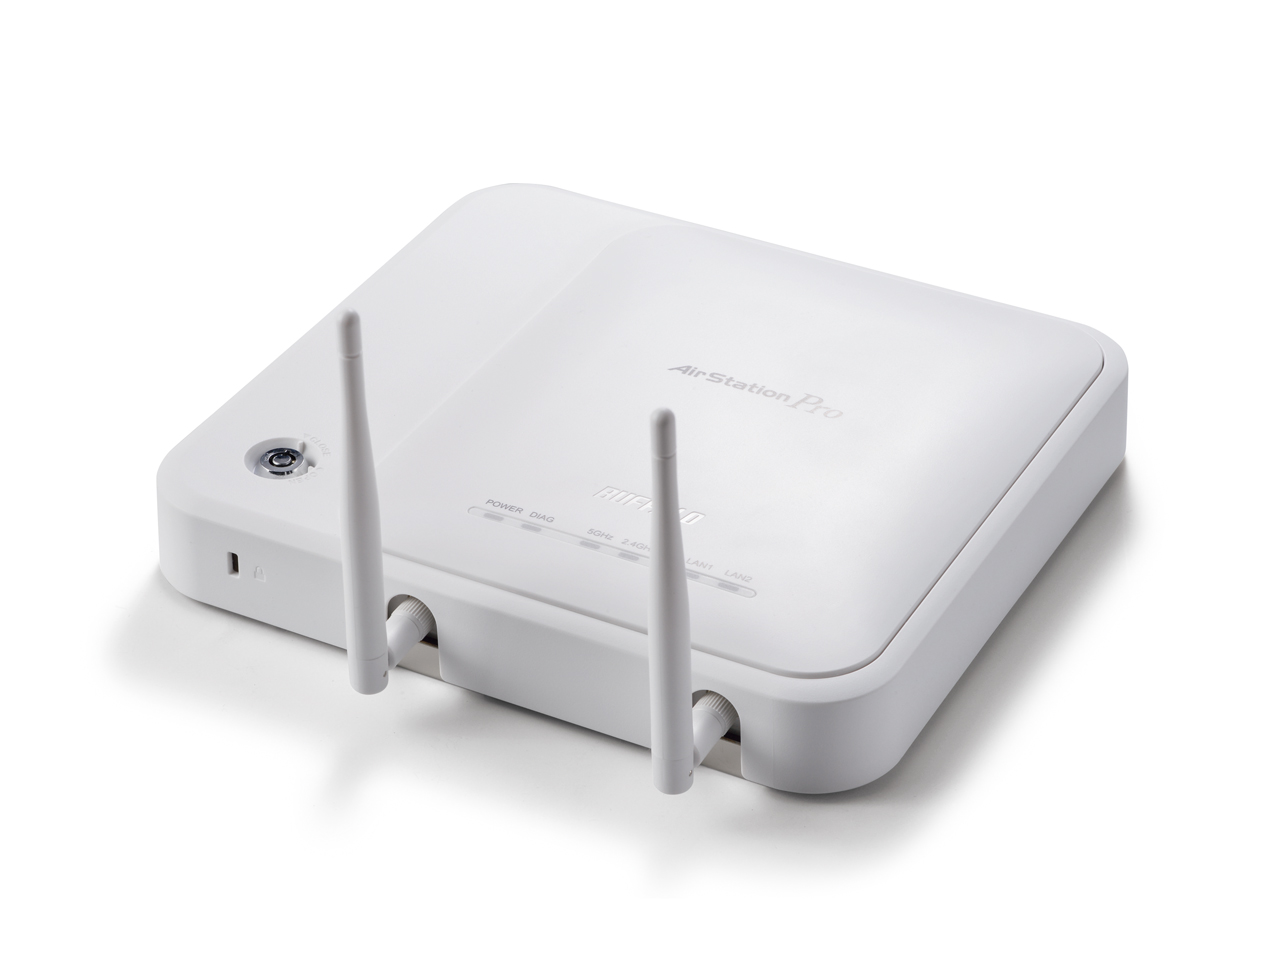 Punct de acces dual band Buffalo WAPS-APG600H AirStation Pro Simultaneous Dual-Band Wireless-N Access Point (600Mbps) WA